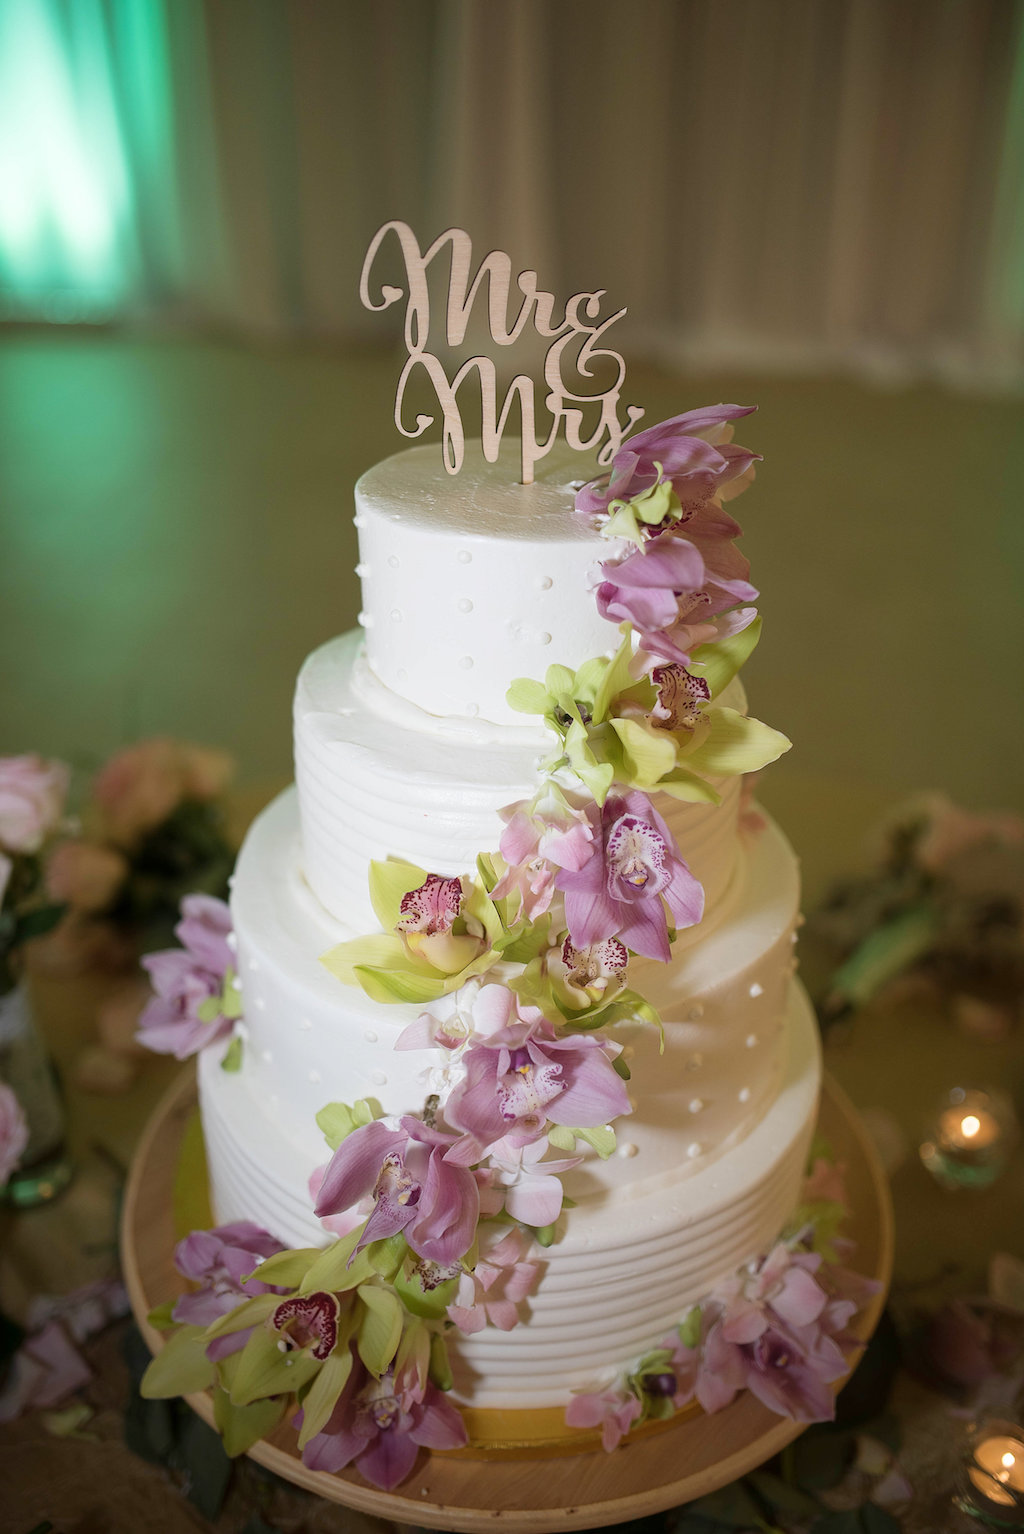 Four Tiered Round White Wedding Cake with Pink Florals and Greenery and Stylish Mr and Mrs Gold Cake Topper on Natural Wood Cake Stand | Tampa Bay Wedding